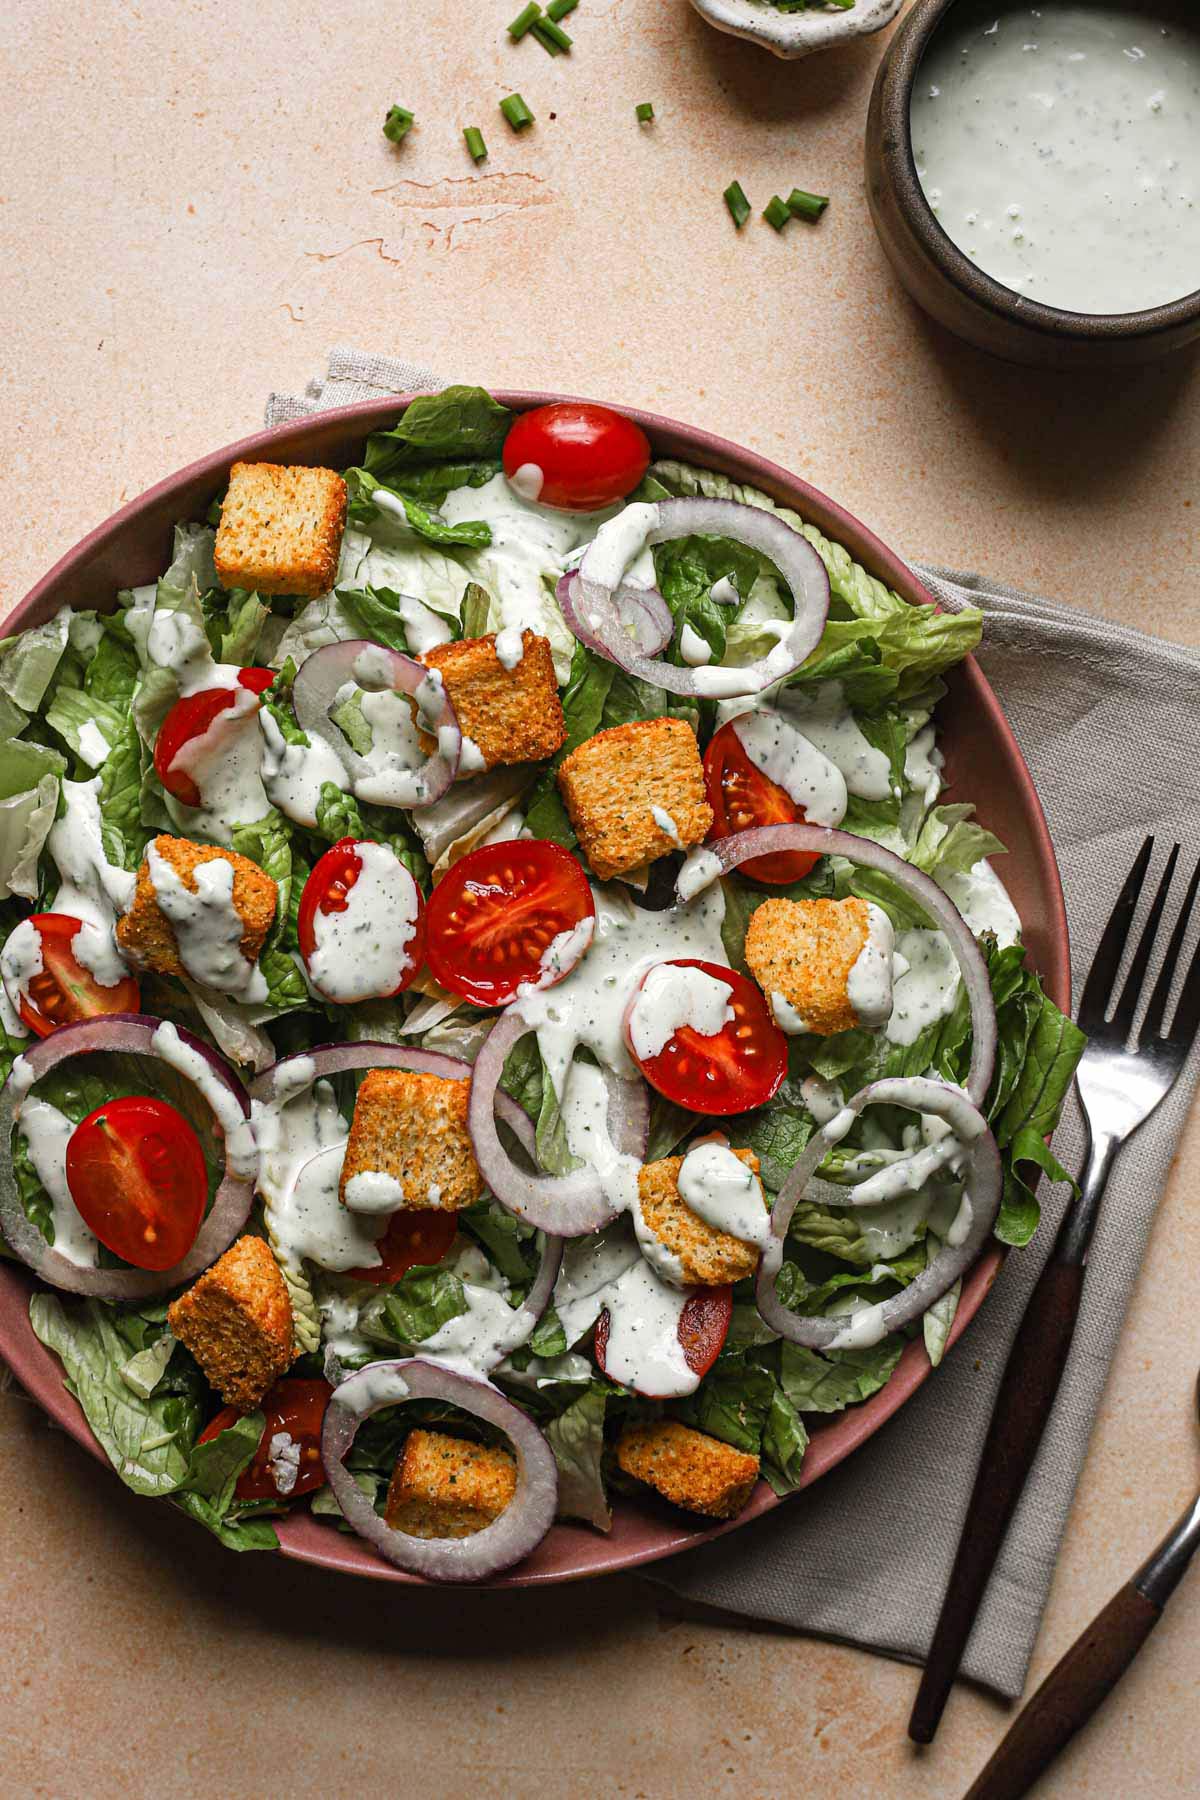 Salad with red onion, tomatoes, and croutons drizzled with homemade ranch dressing.